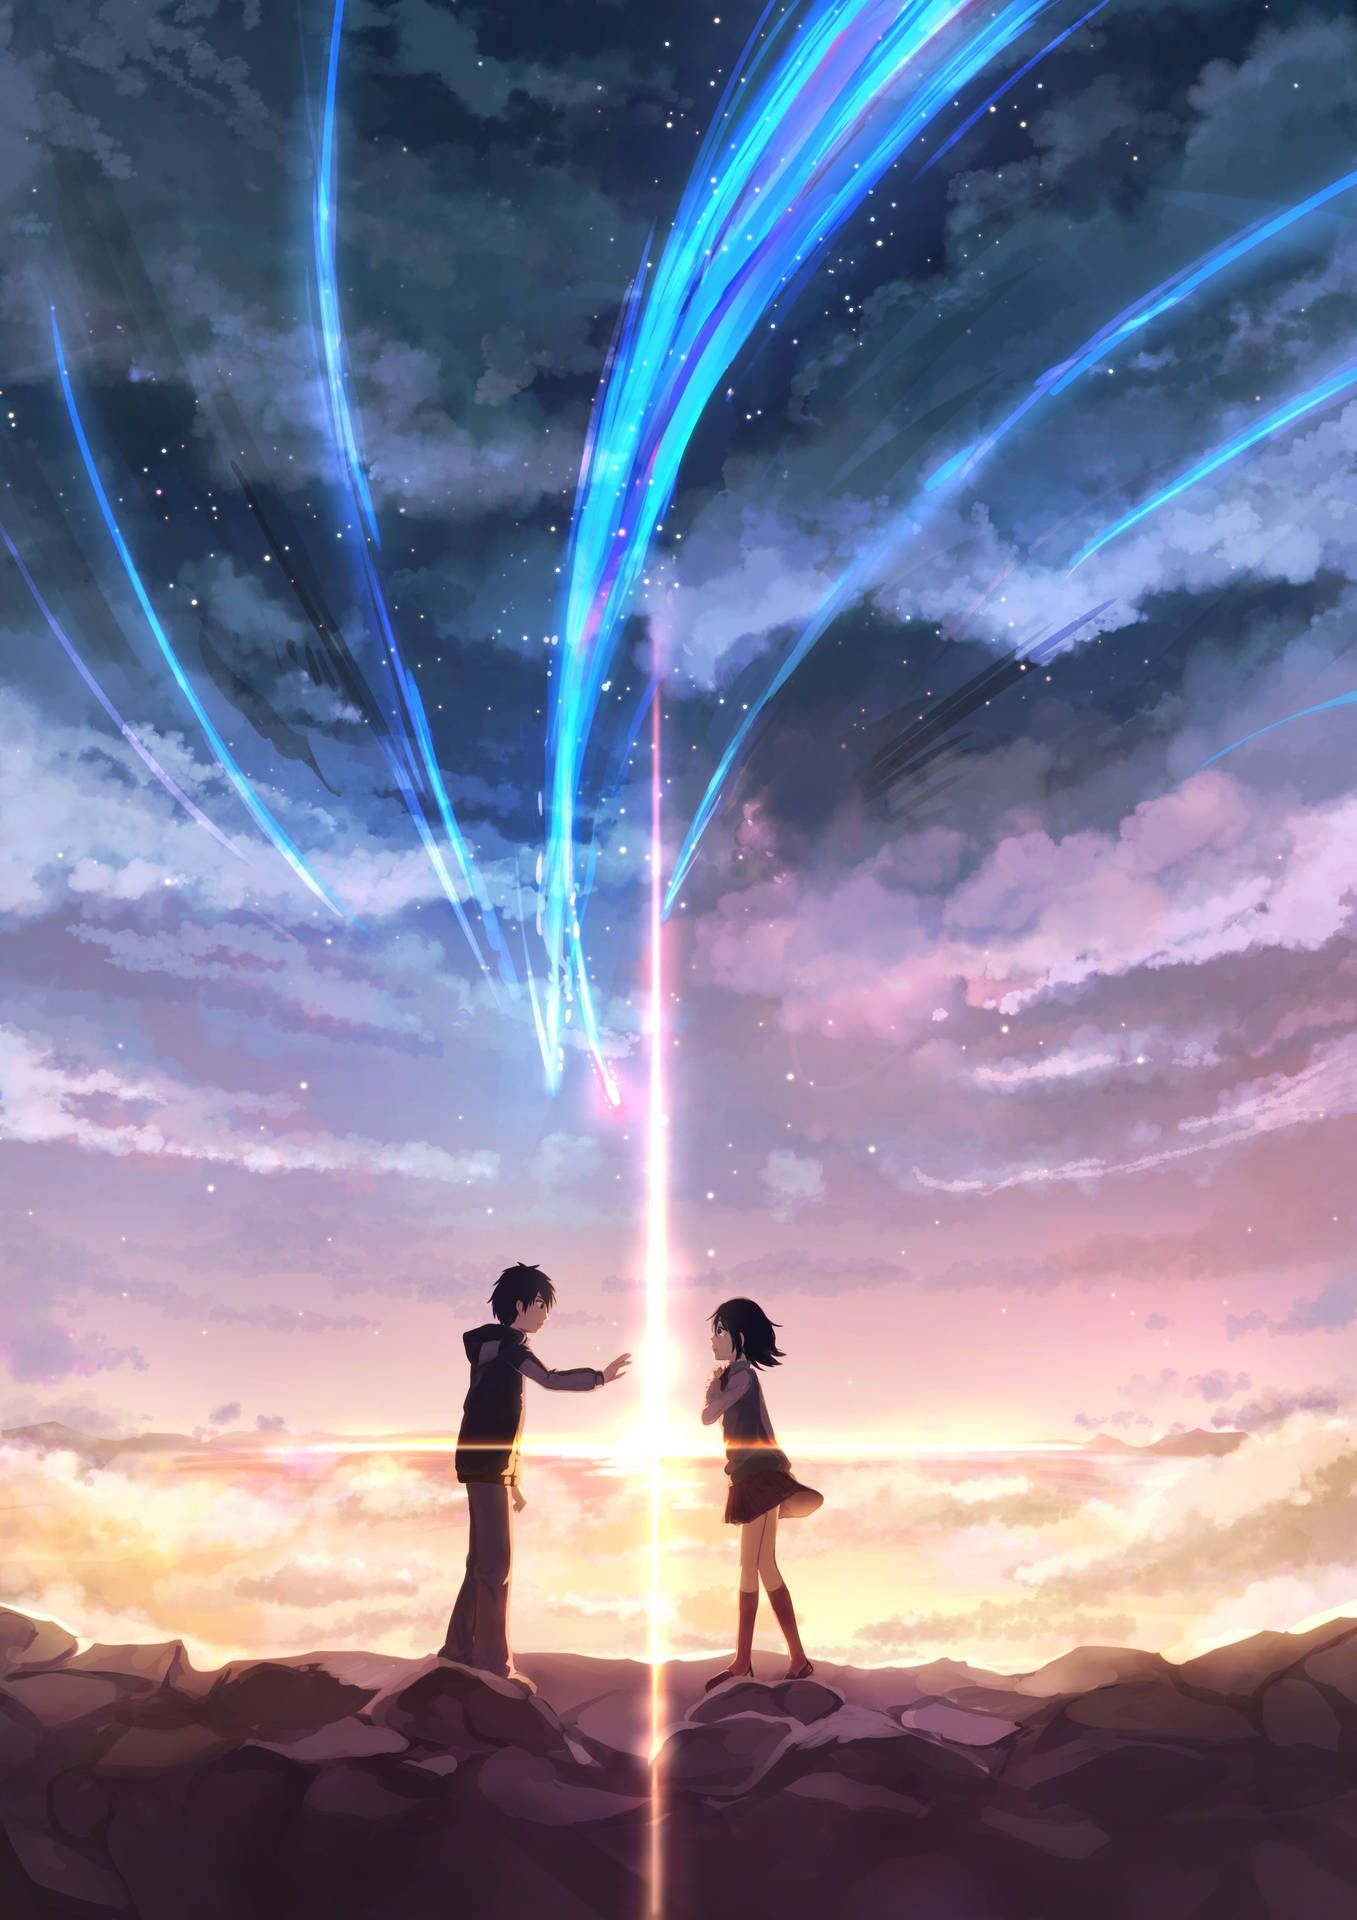 Gazing at the falling stars, with 'Your Name' written in them. Wallpaper